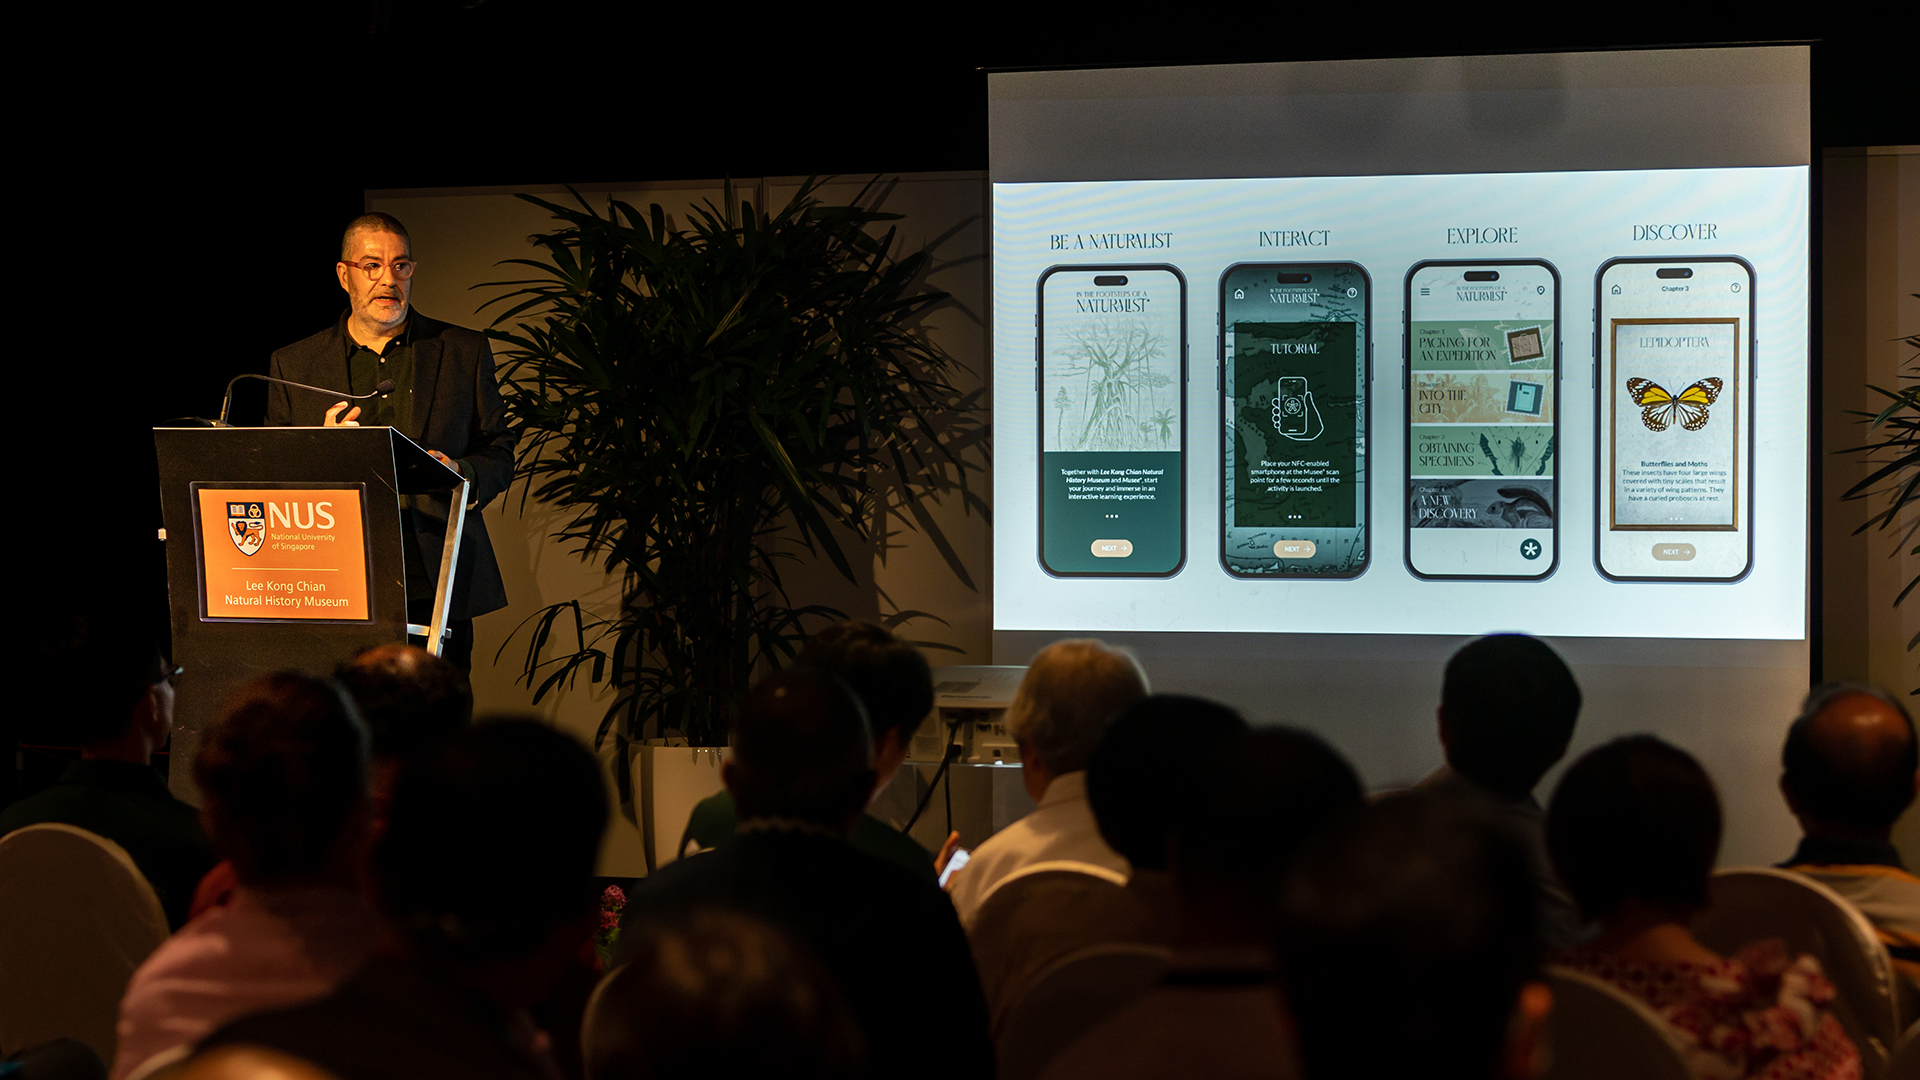 Assoc Prof Christophe Gaubert, Director of the DIC, introducing the app at the Lee Kong Chian Natural History Museum's eighth anniversary celebration.